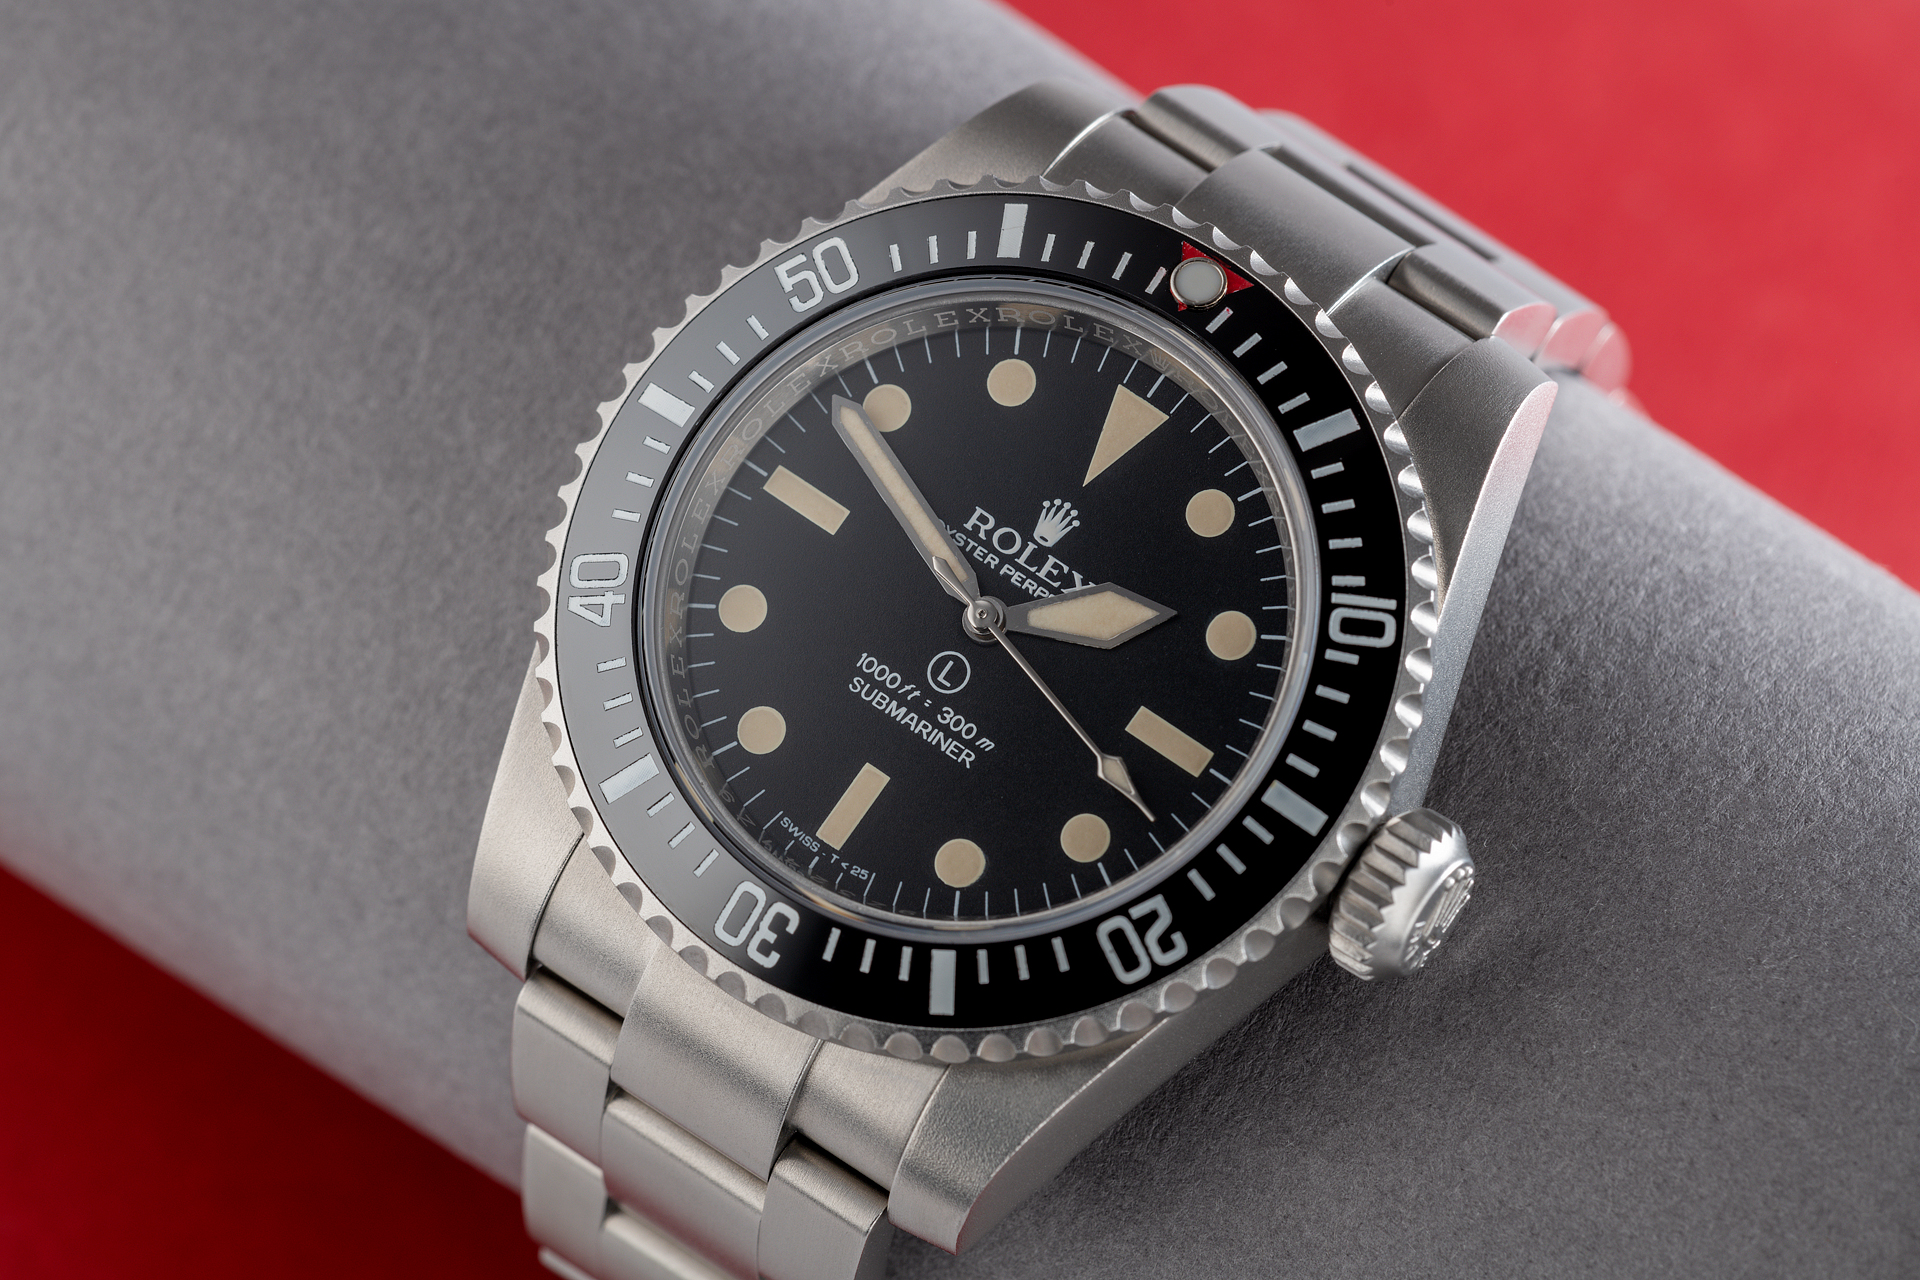 Bamford Watch Department Releases MilSub and Submariner Heritage Watch  Models